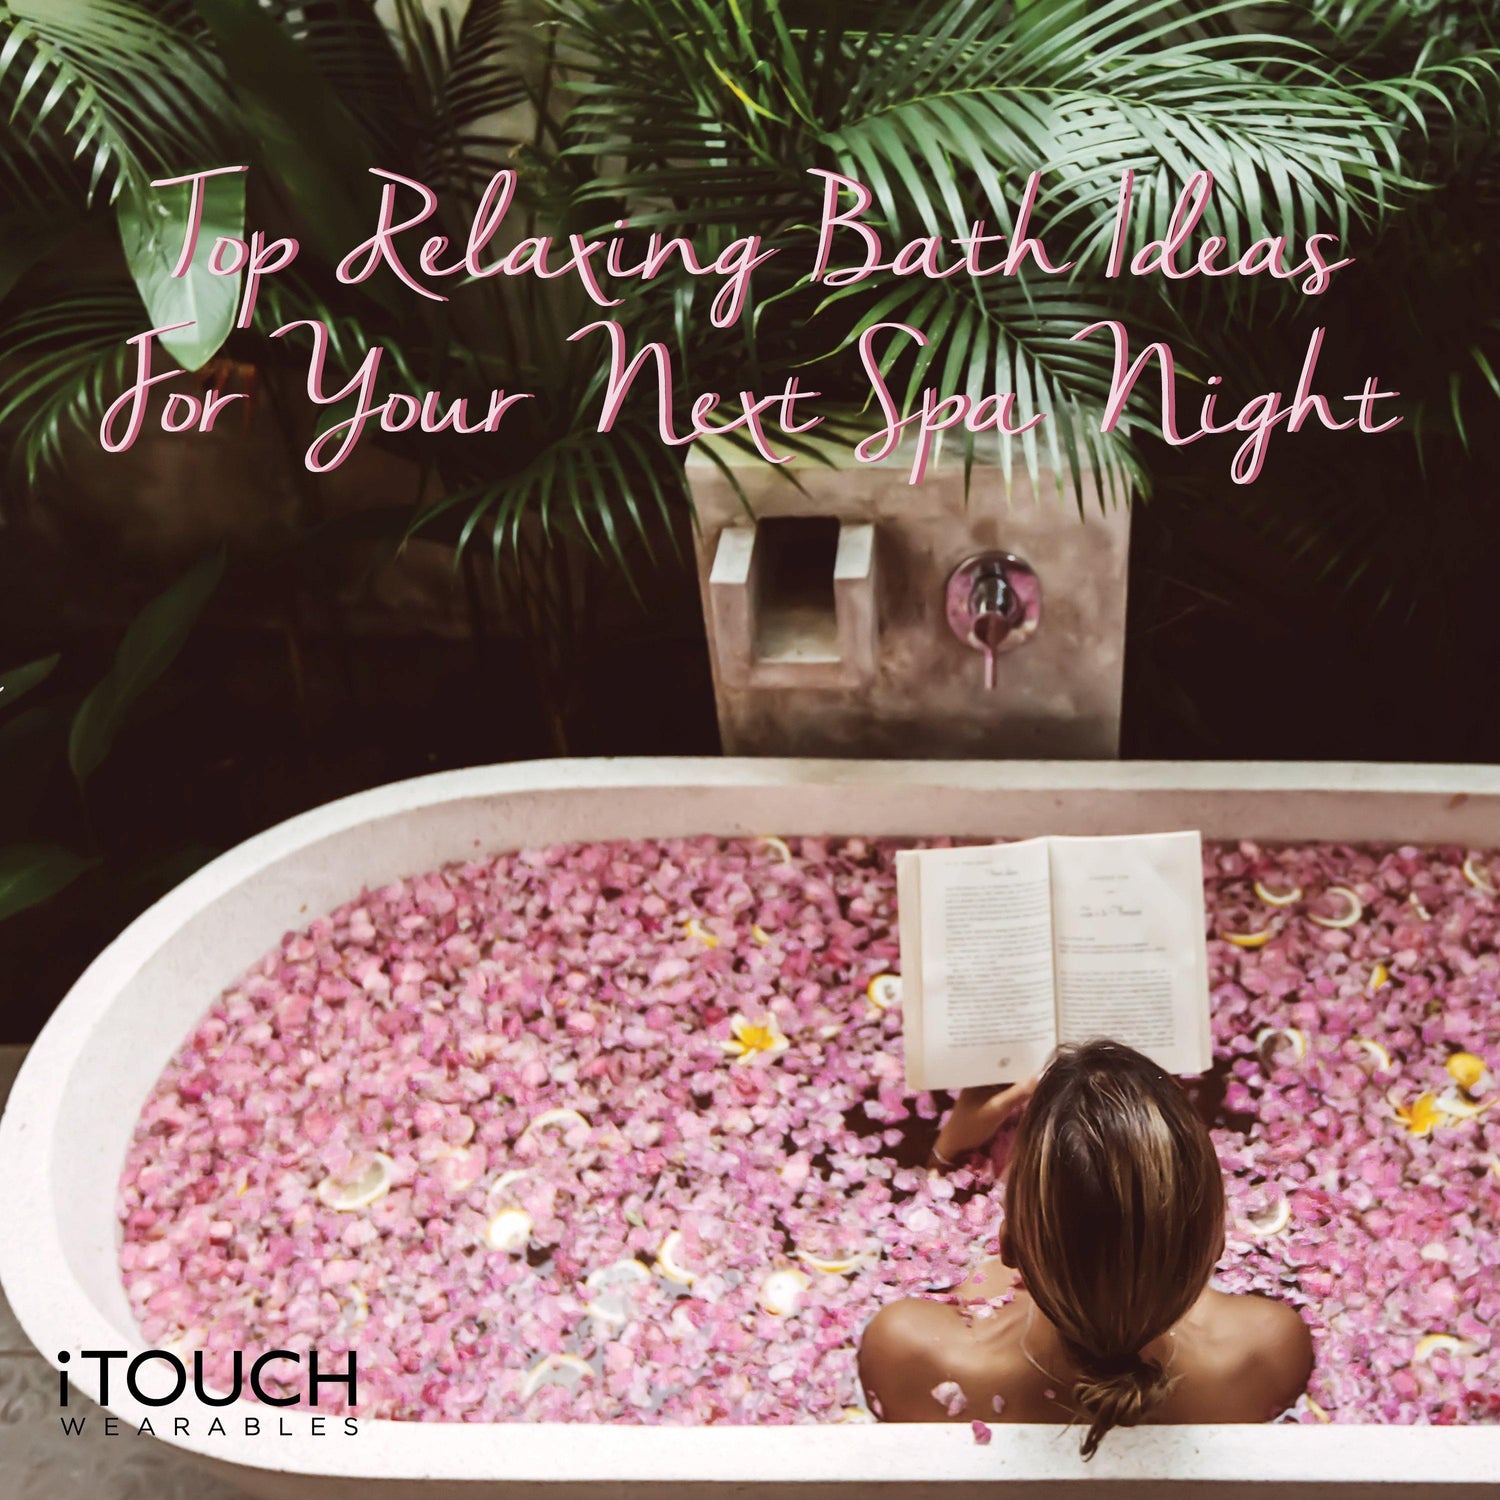 Top Relaxing Bath Ideas For Your Next Spa Night - iTOUCH Wearables